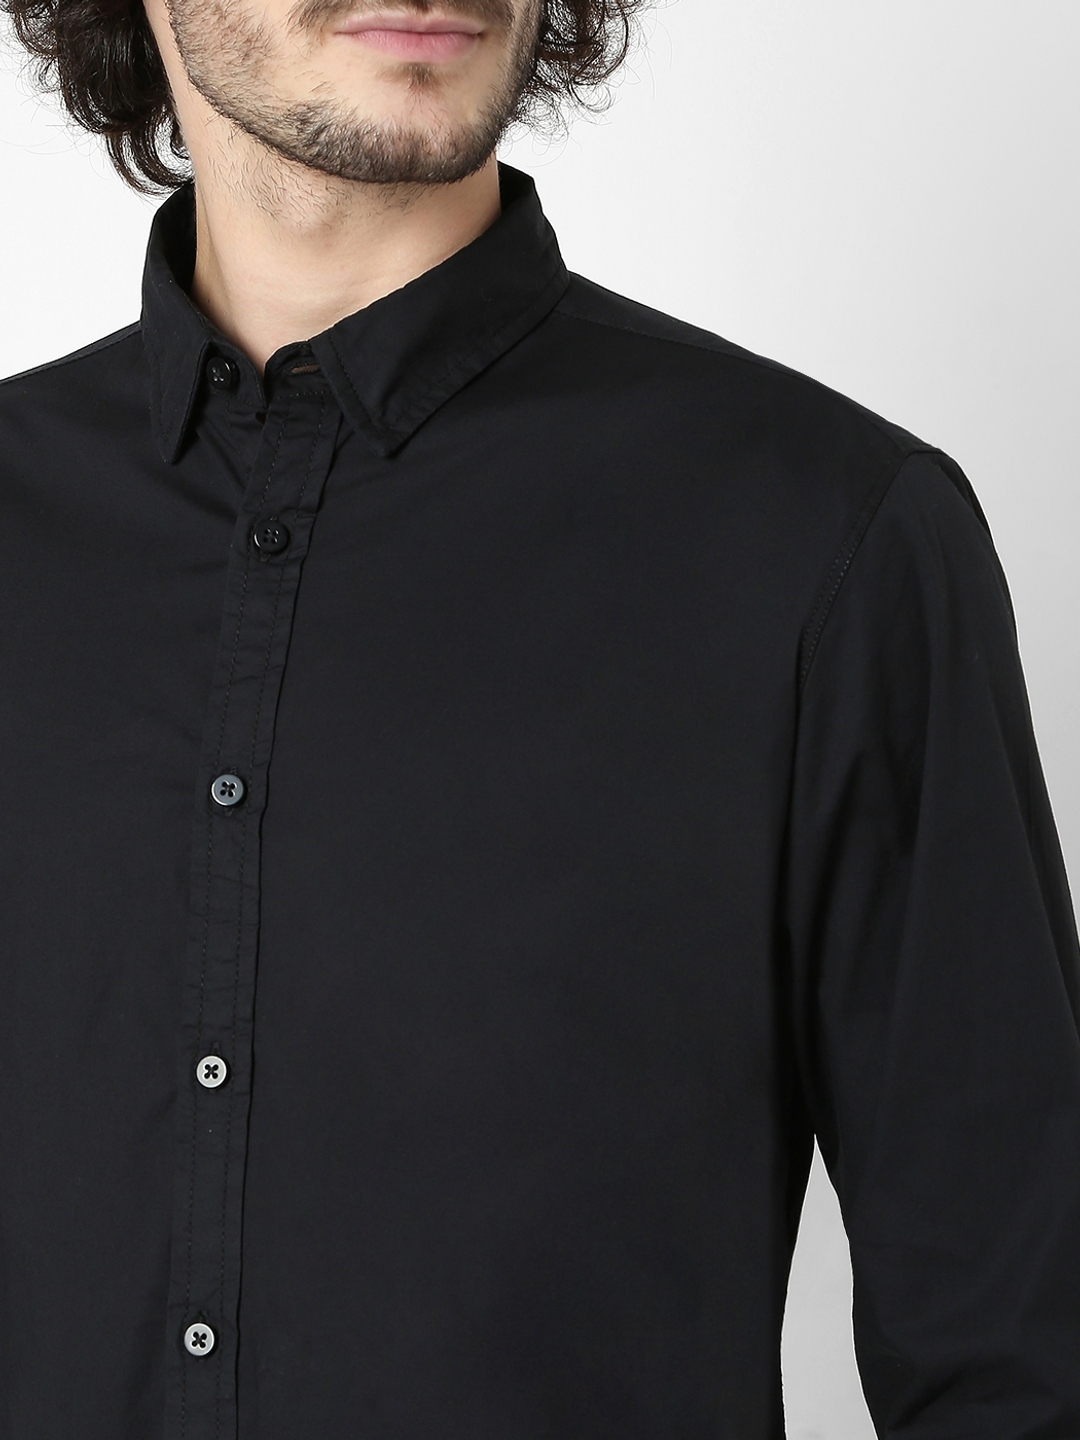 Cotton Slim Fit Shirt with Spread Collar